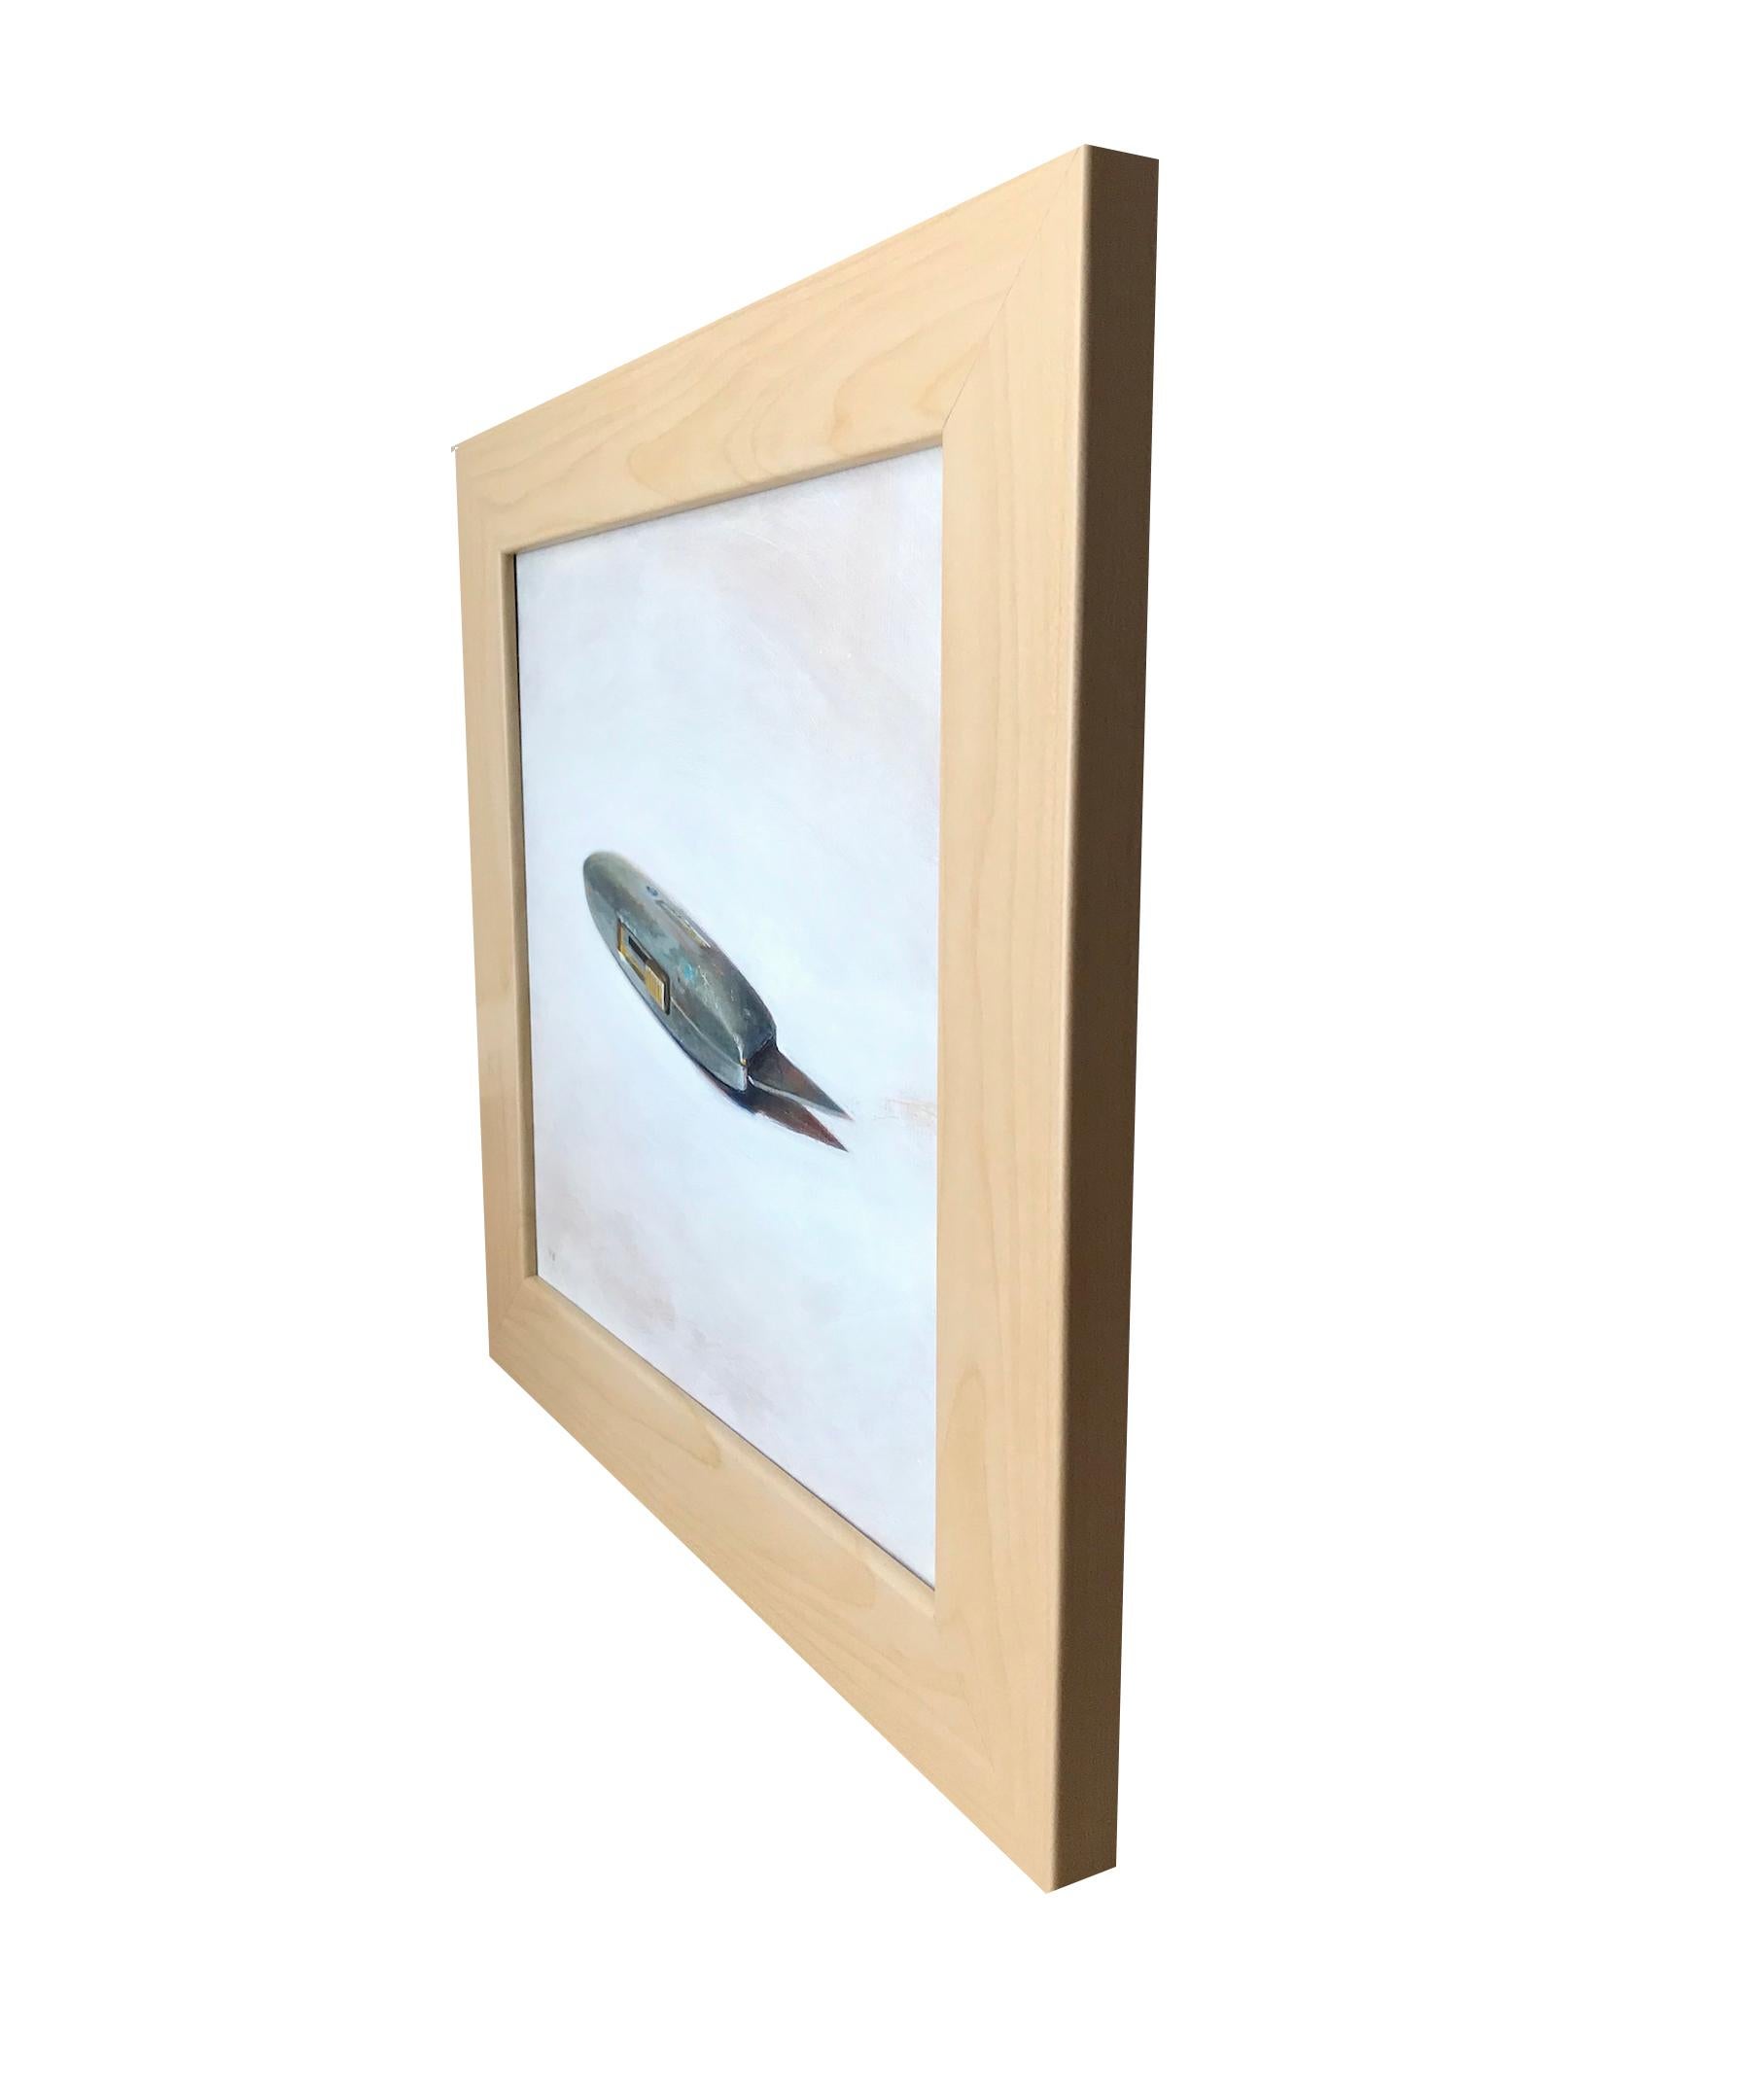 Blade (Framed Realistic Still Life Oil Painting of Grey Utility Knife on Beige) For Sale 2